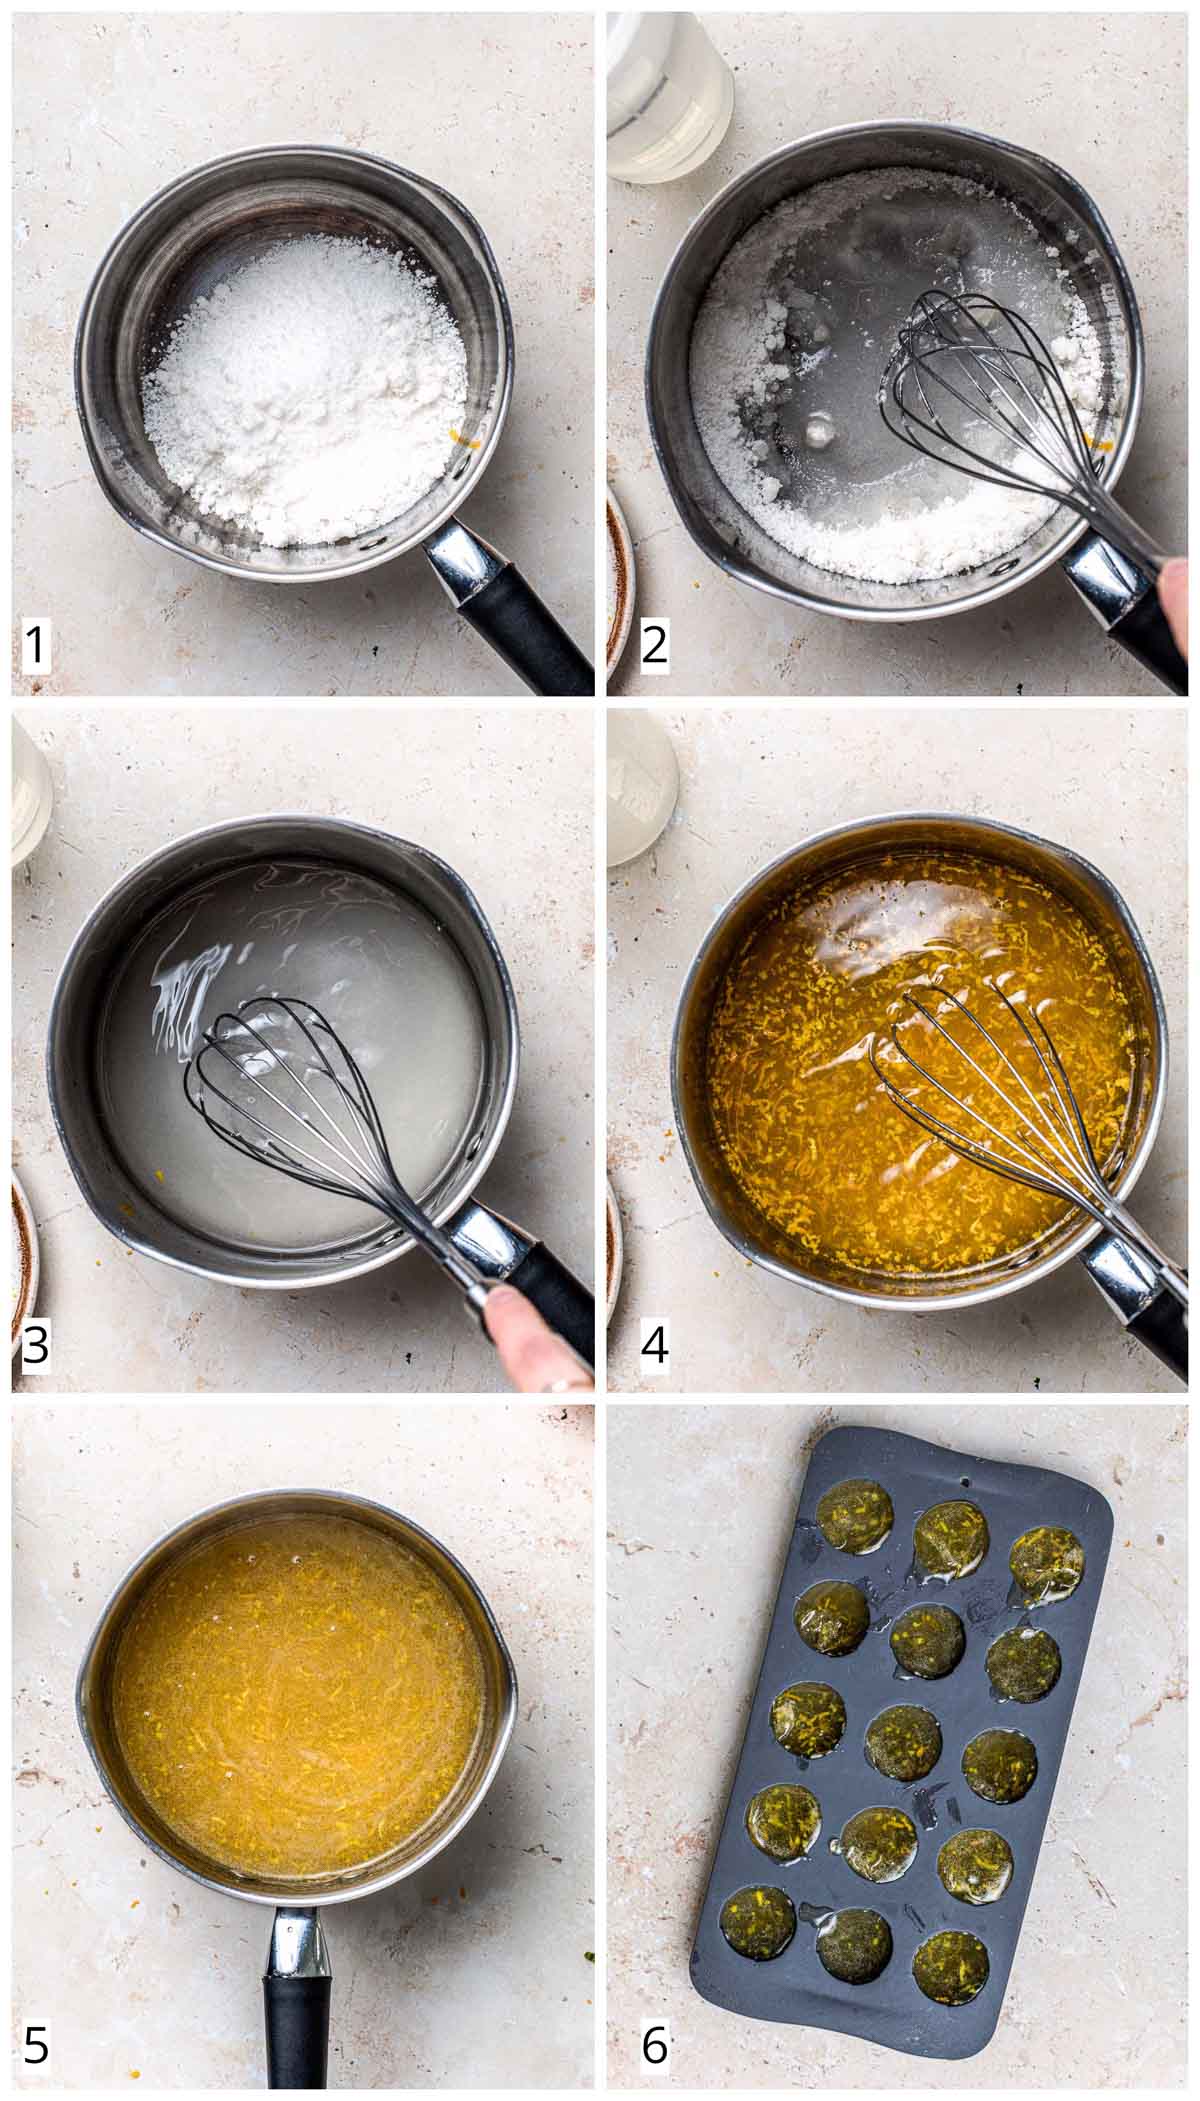 A collage of 6 images showing the steps of making orange konnyaku jelly.